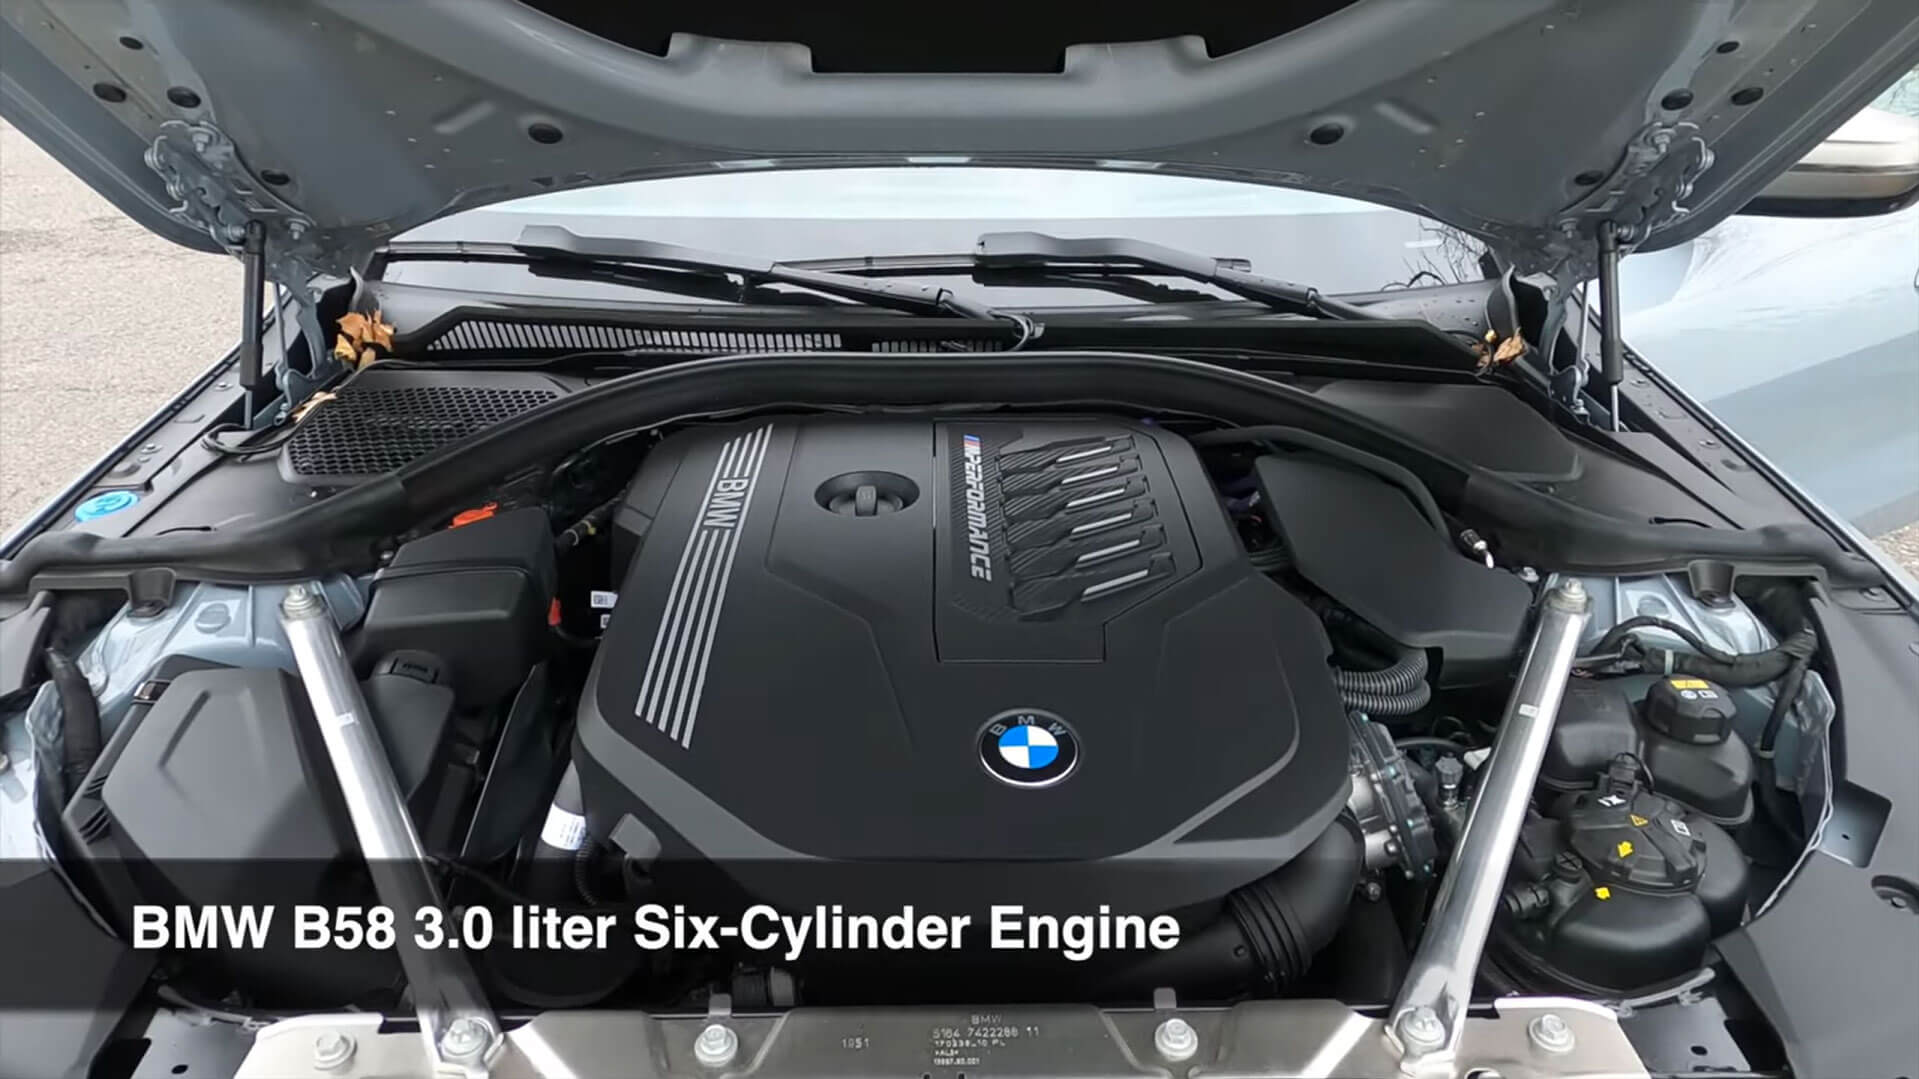 A BMW B58 Engine with all of its components